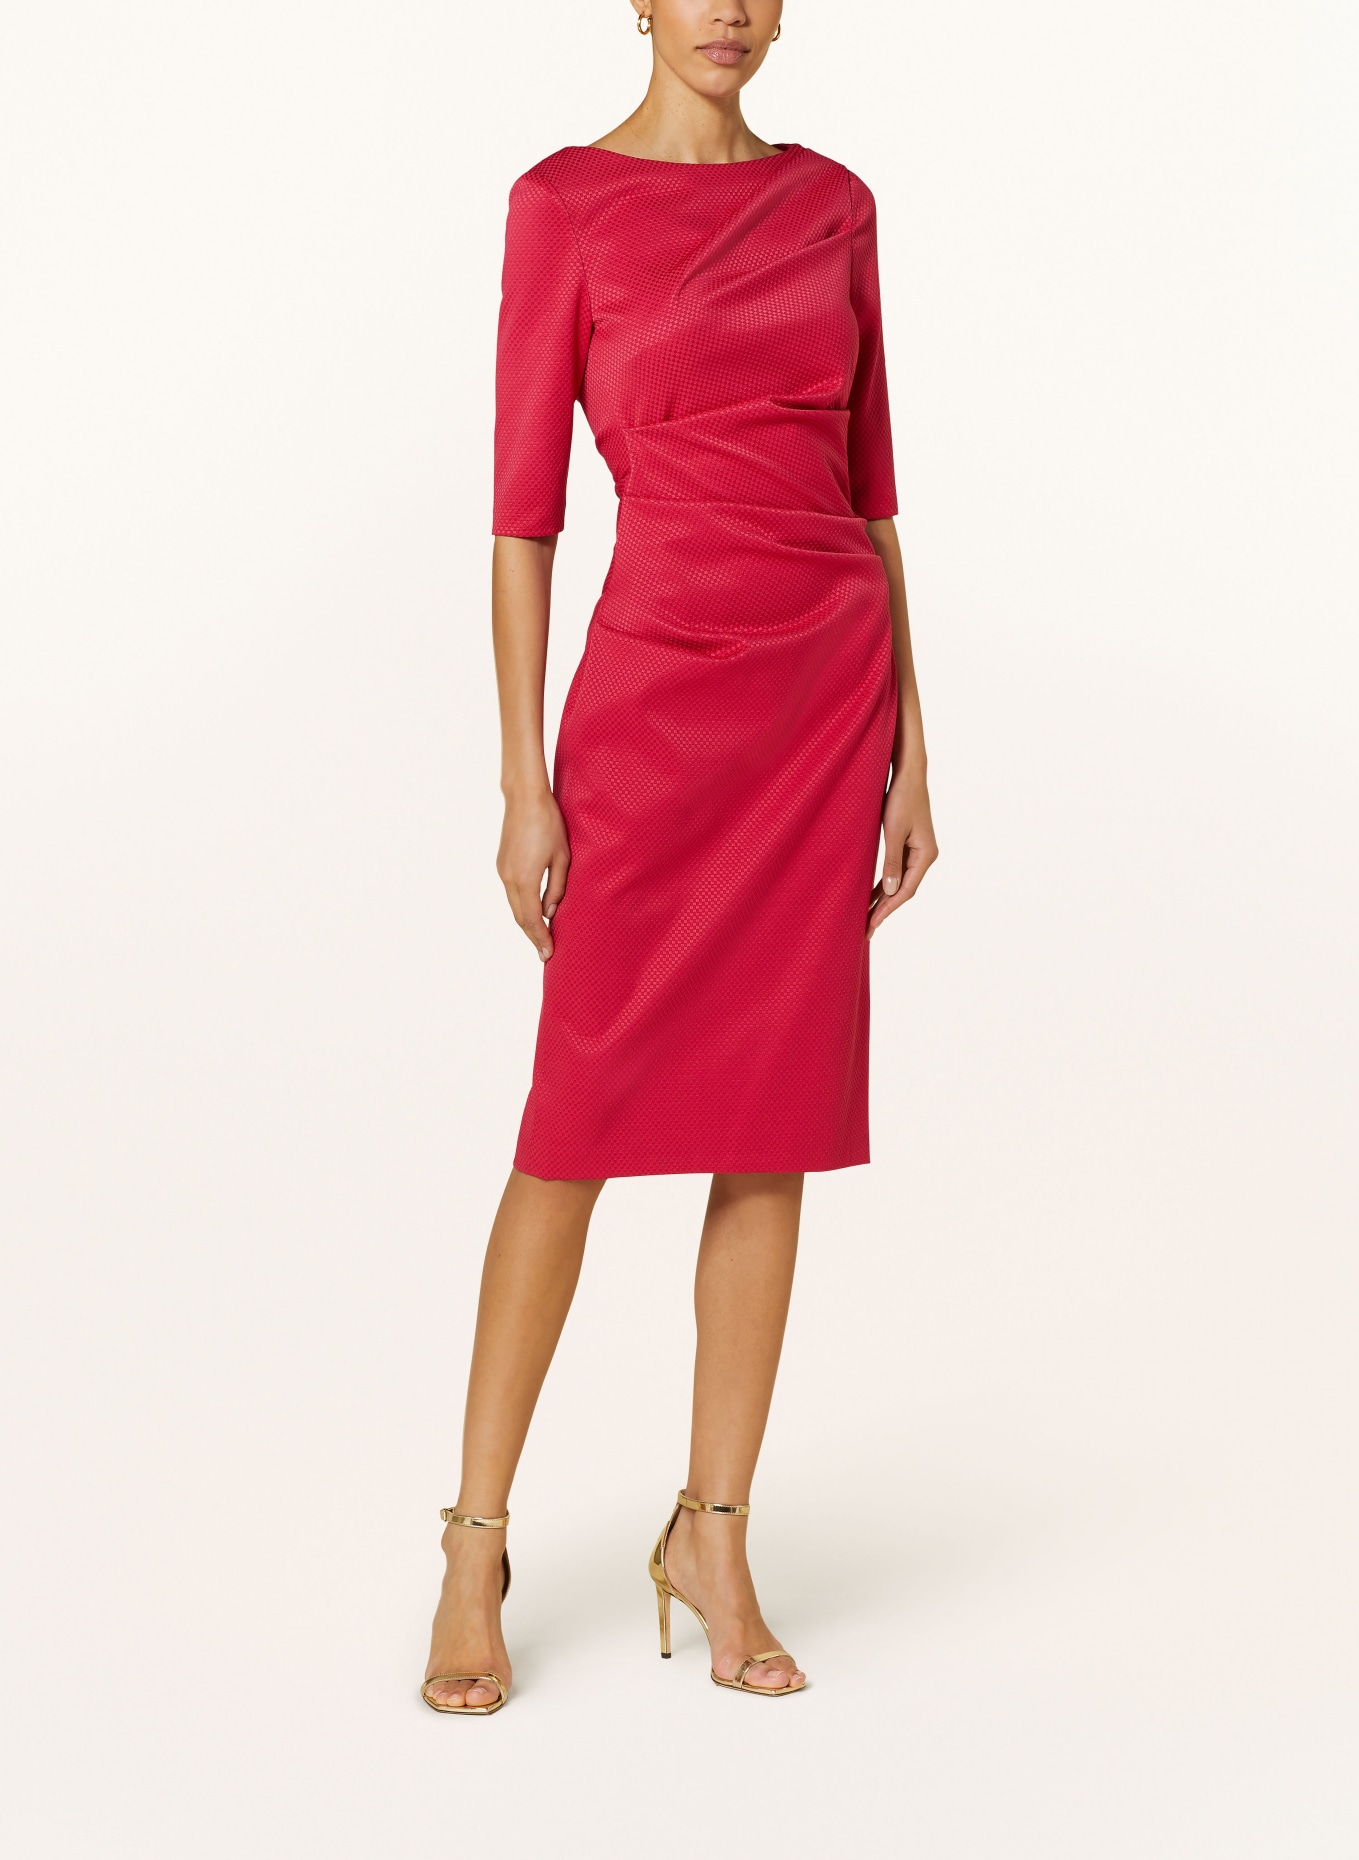 TALBOT RUNHOF Cocktail dress with 3/4 sleeves, Color: PINK (Image 2)